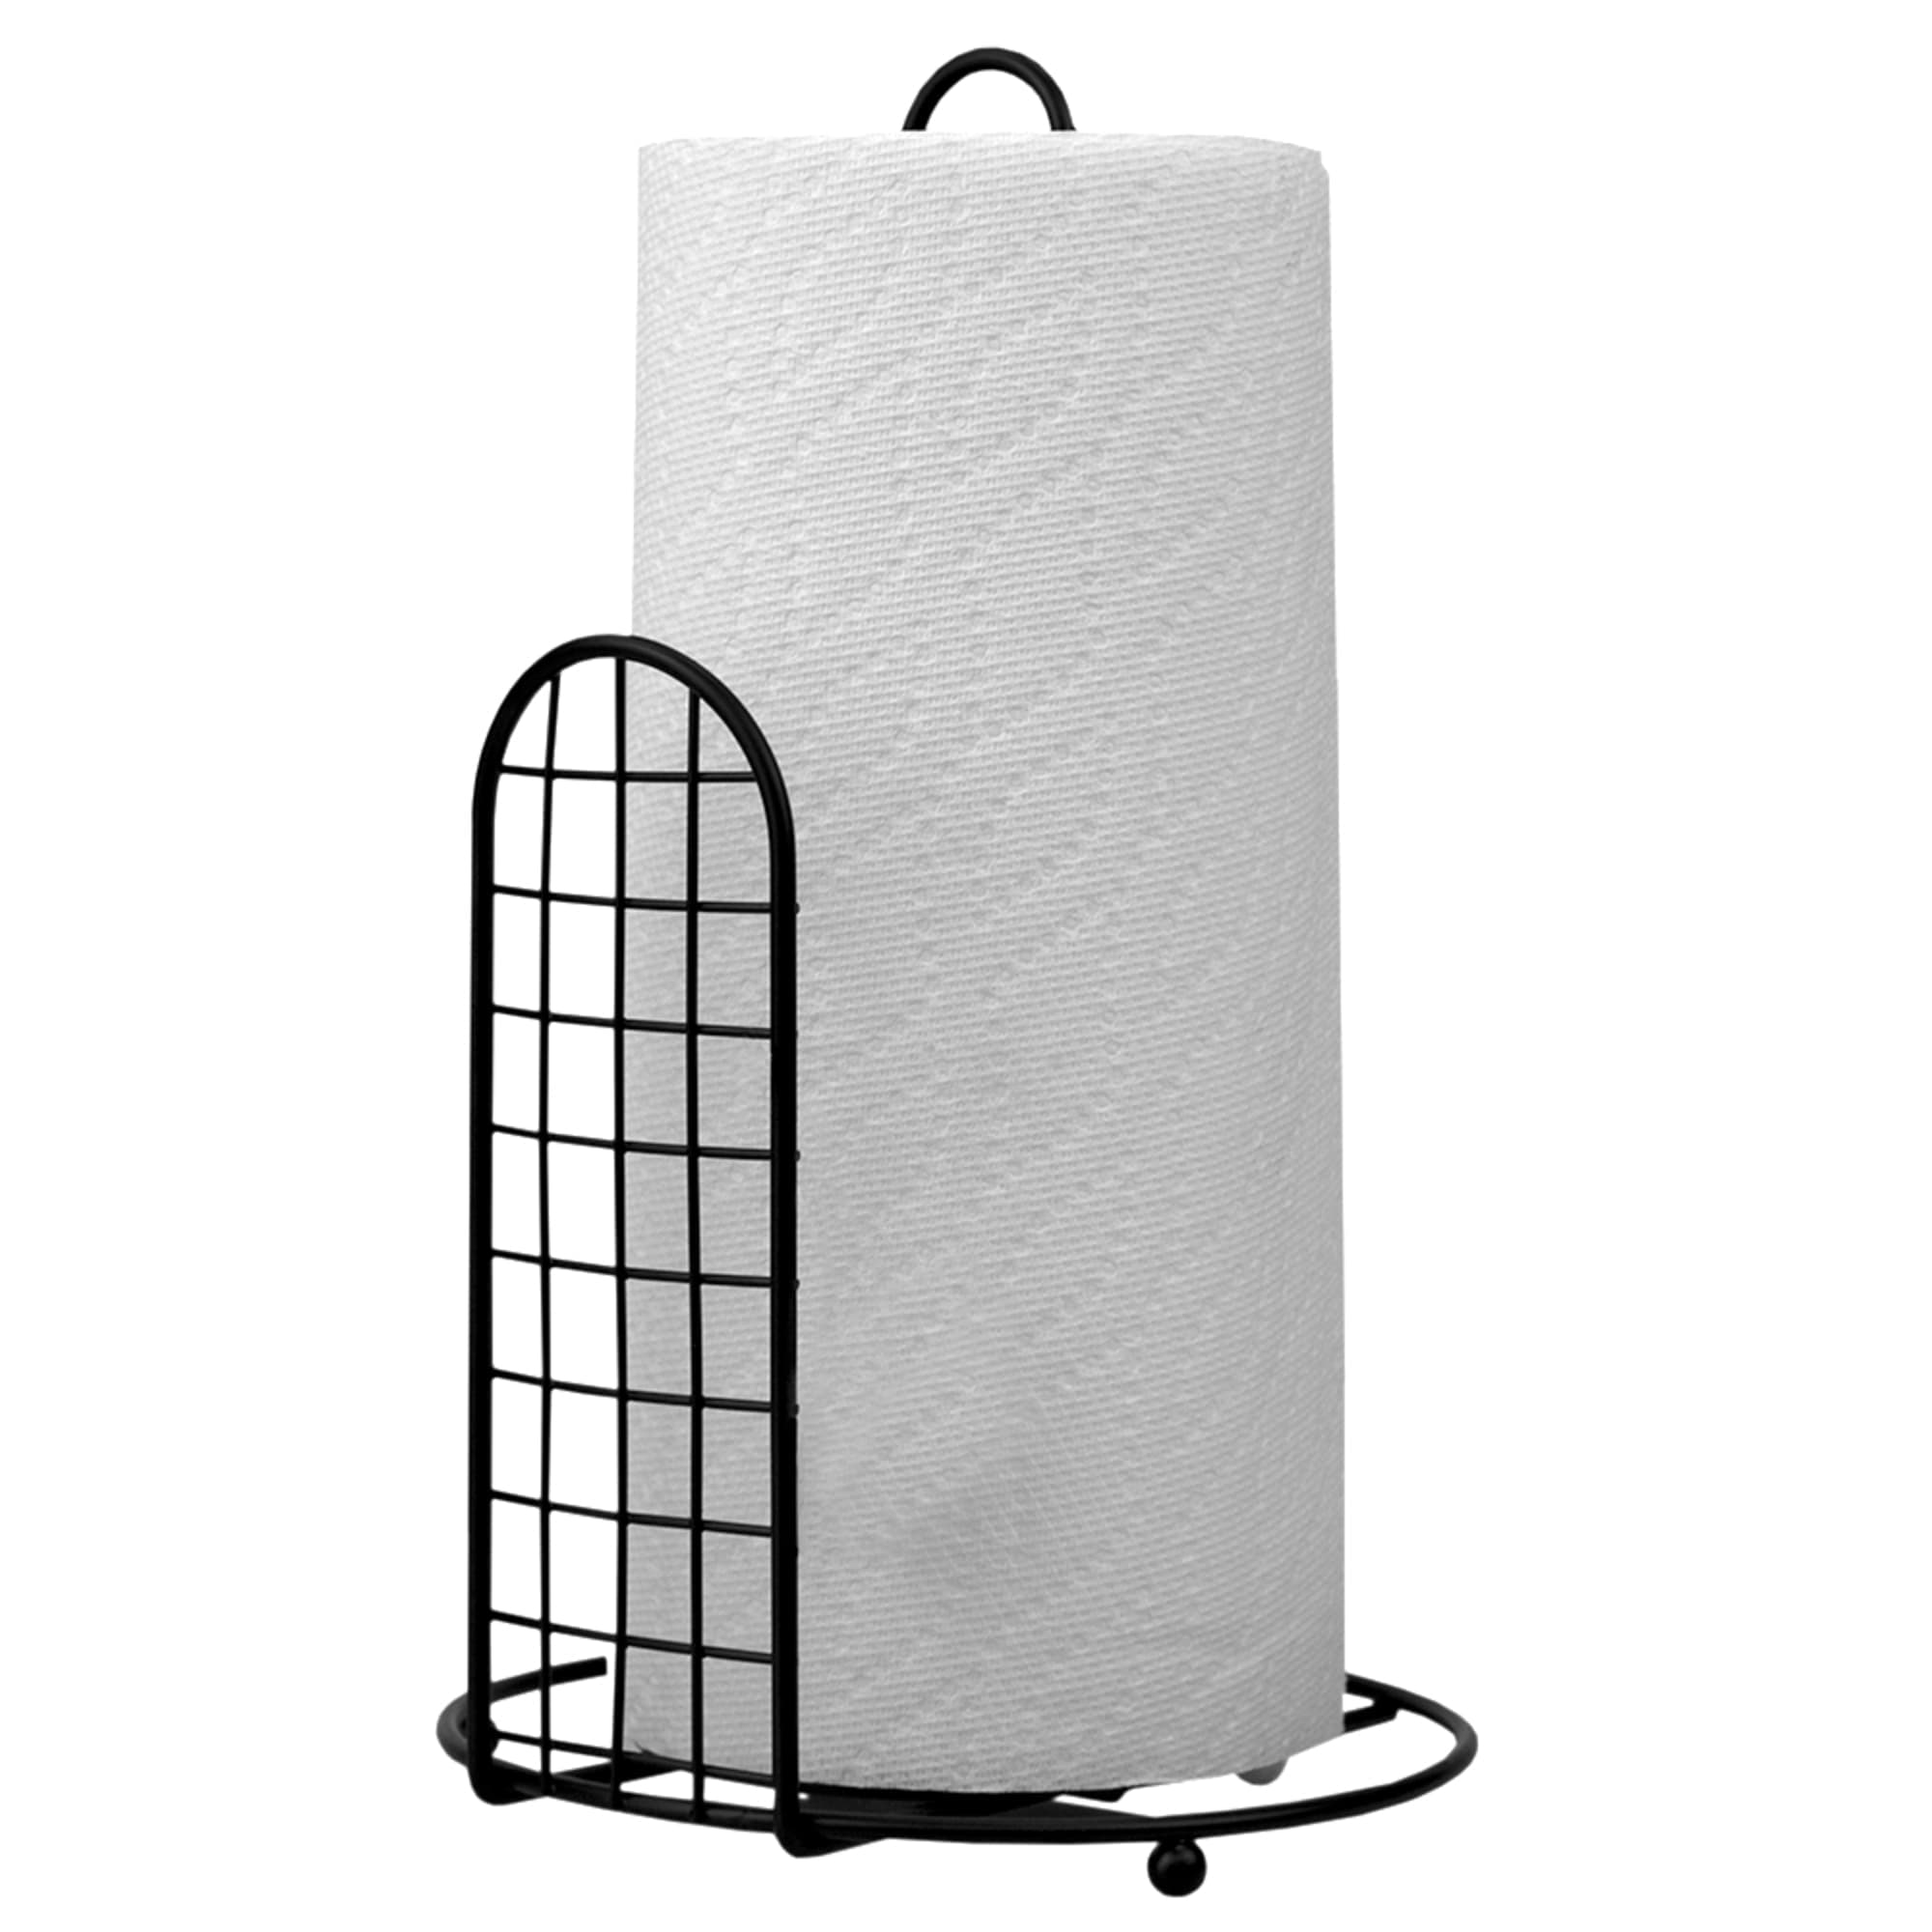 Home Basics Grid Collection Free Standing Paper Towel Holder, Black $4.00 EACH, CASE PACK OF 12